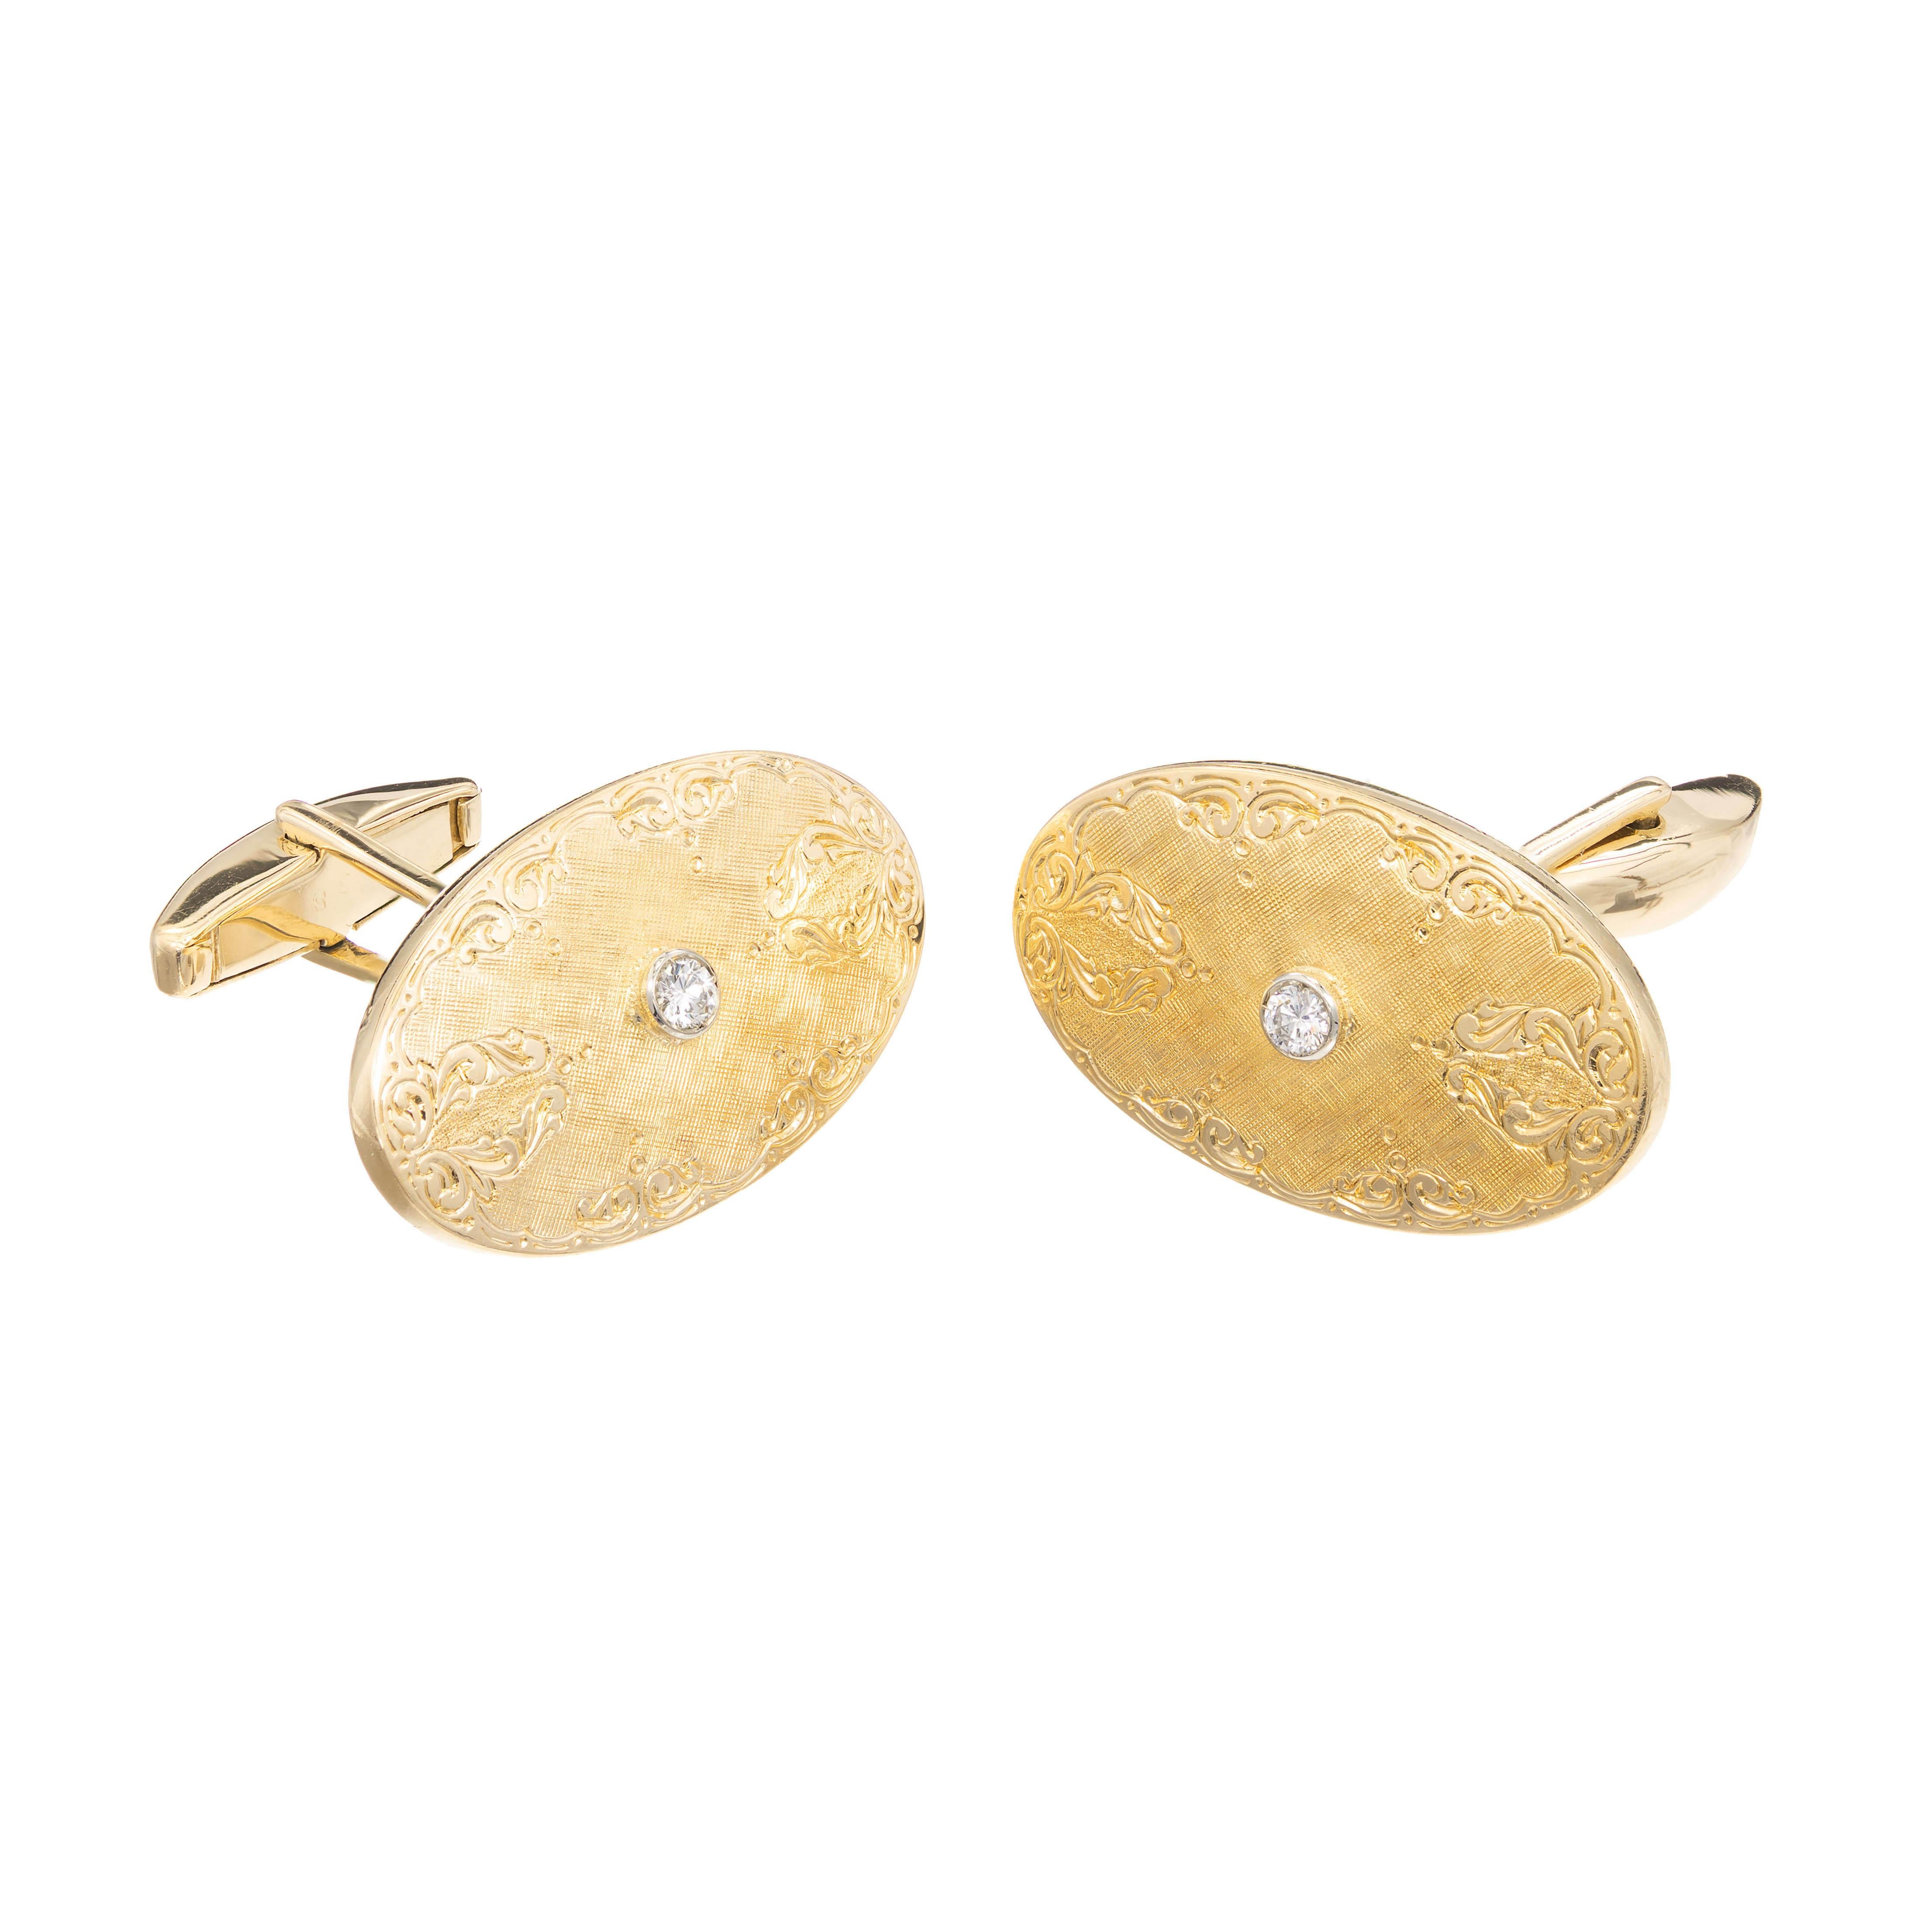 Diamond 18k Yellow gold oval shaped cufflinks. A round diamond is bezel set in a 18k white gold setting and placed in the center of the 18k yellow gold oval with engraving and etching design with a high polish outside.

2 round brilliant cut H-I VS